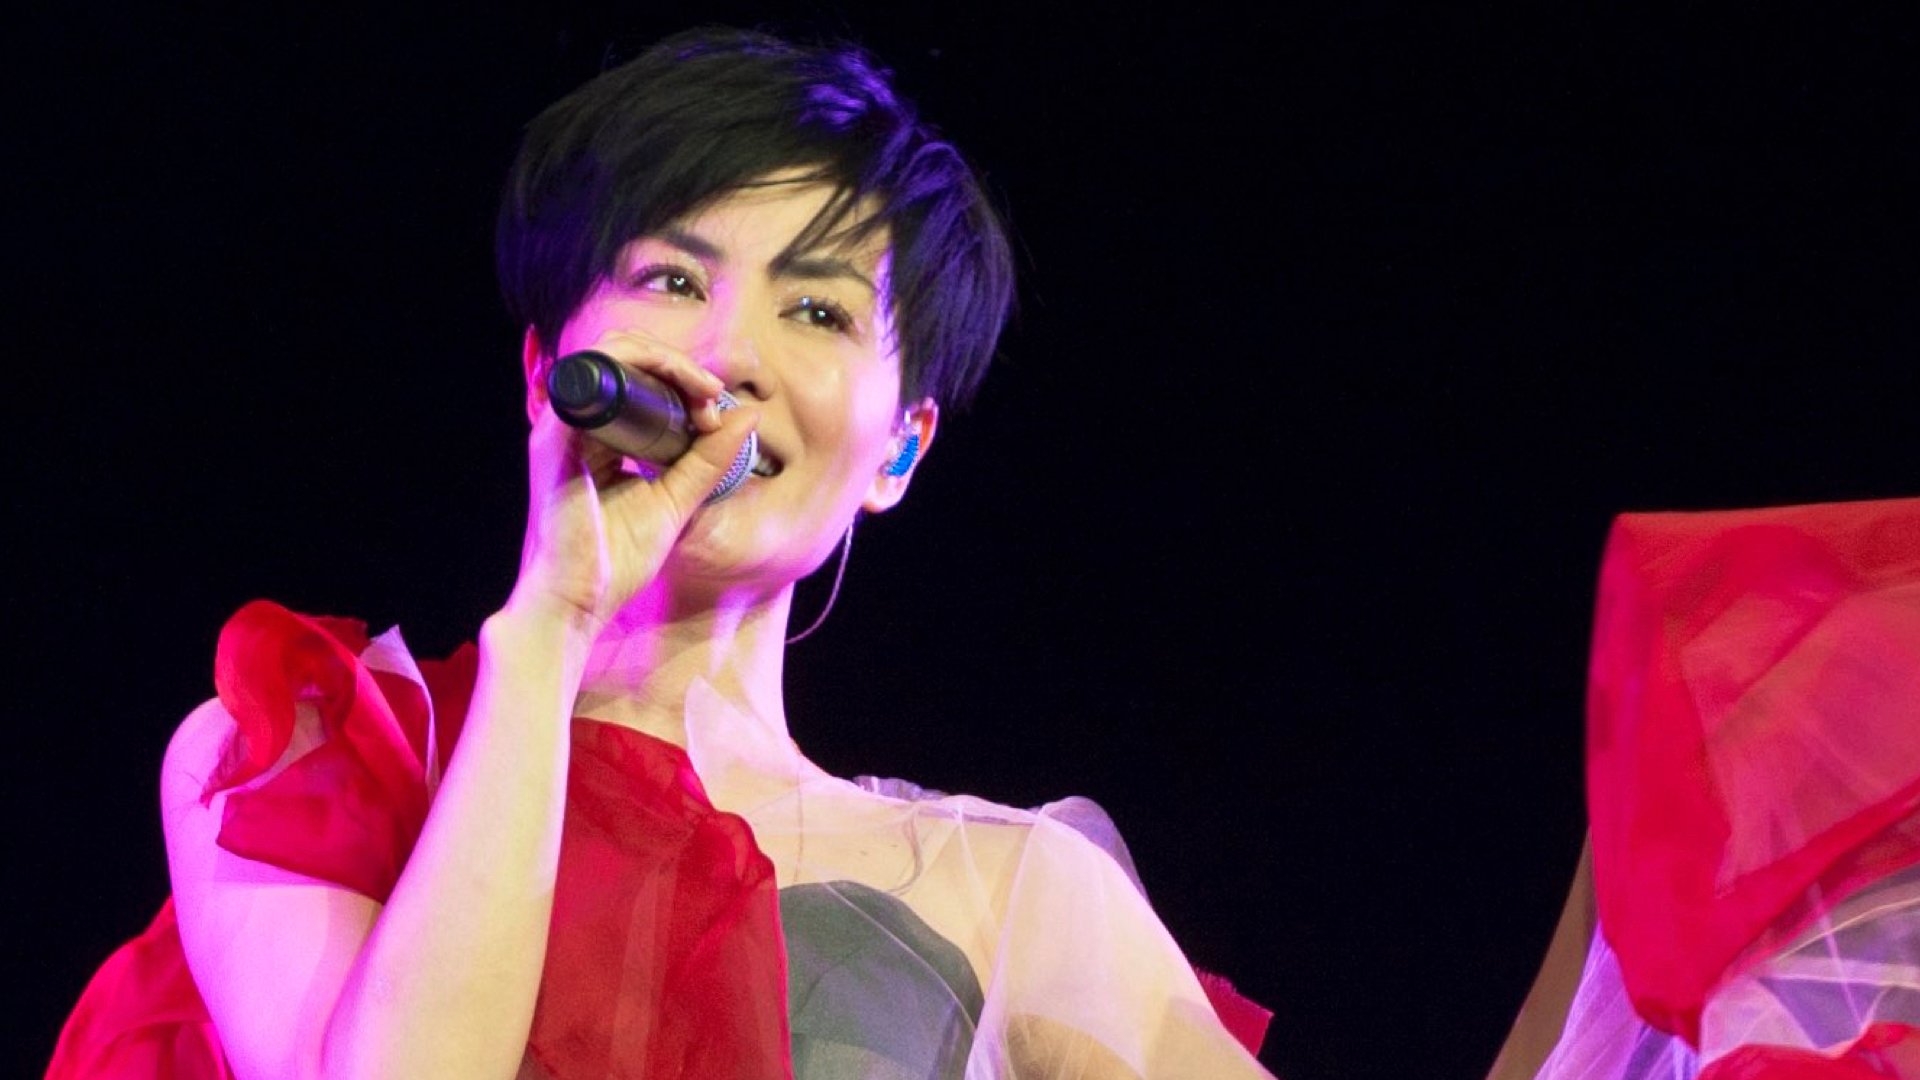 Faye Wong performing in concert 2011